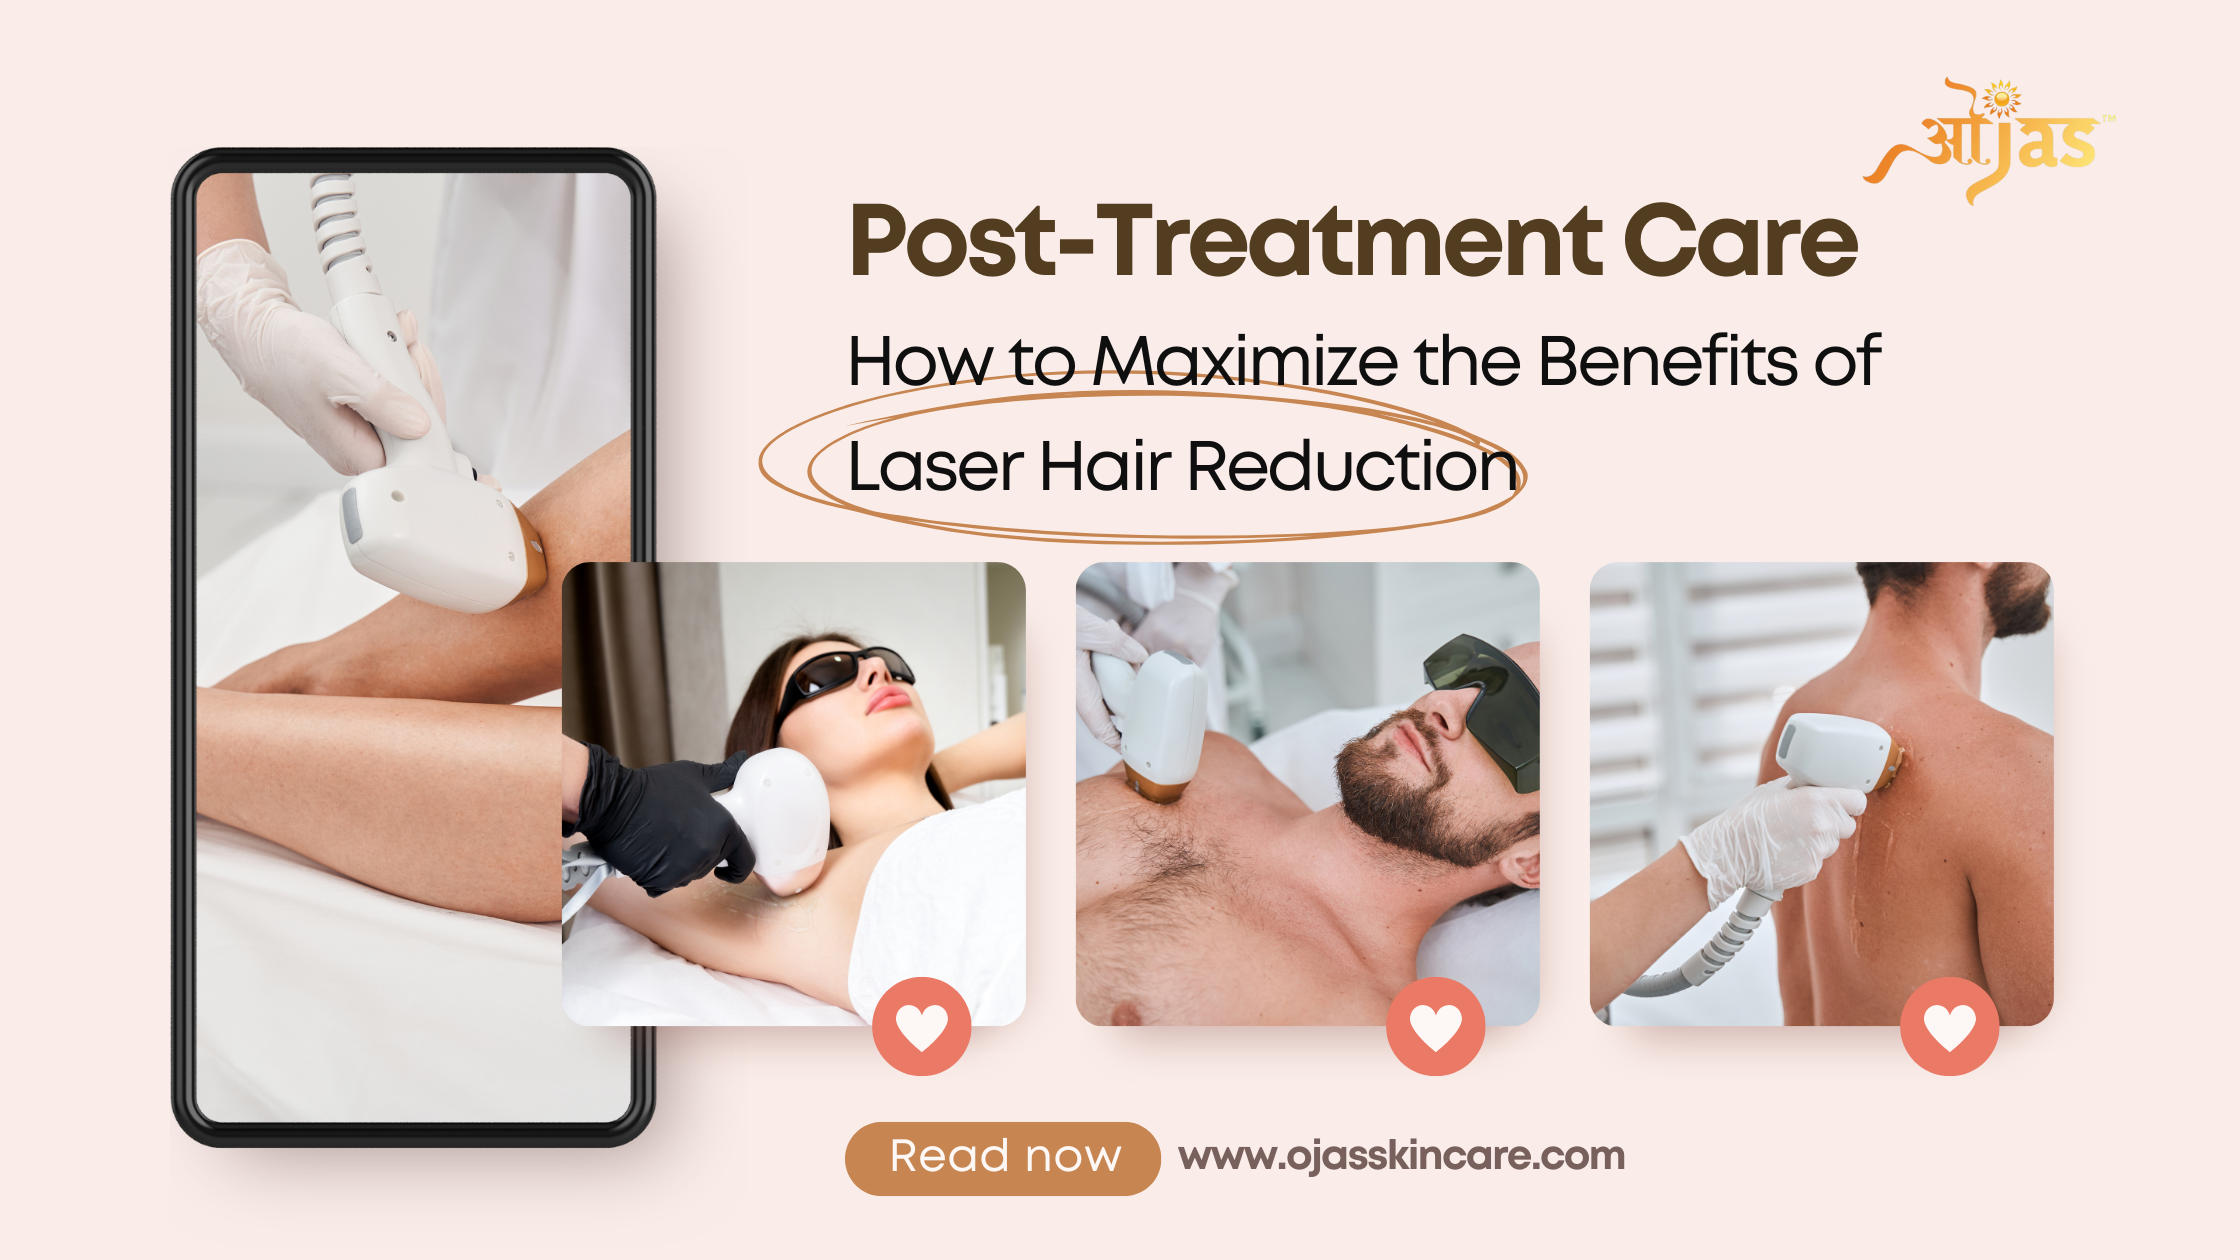 Post-Treatment Care: How to Maximize the Benefits of Laser Hair Reduction